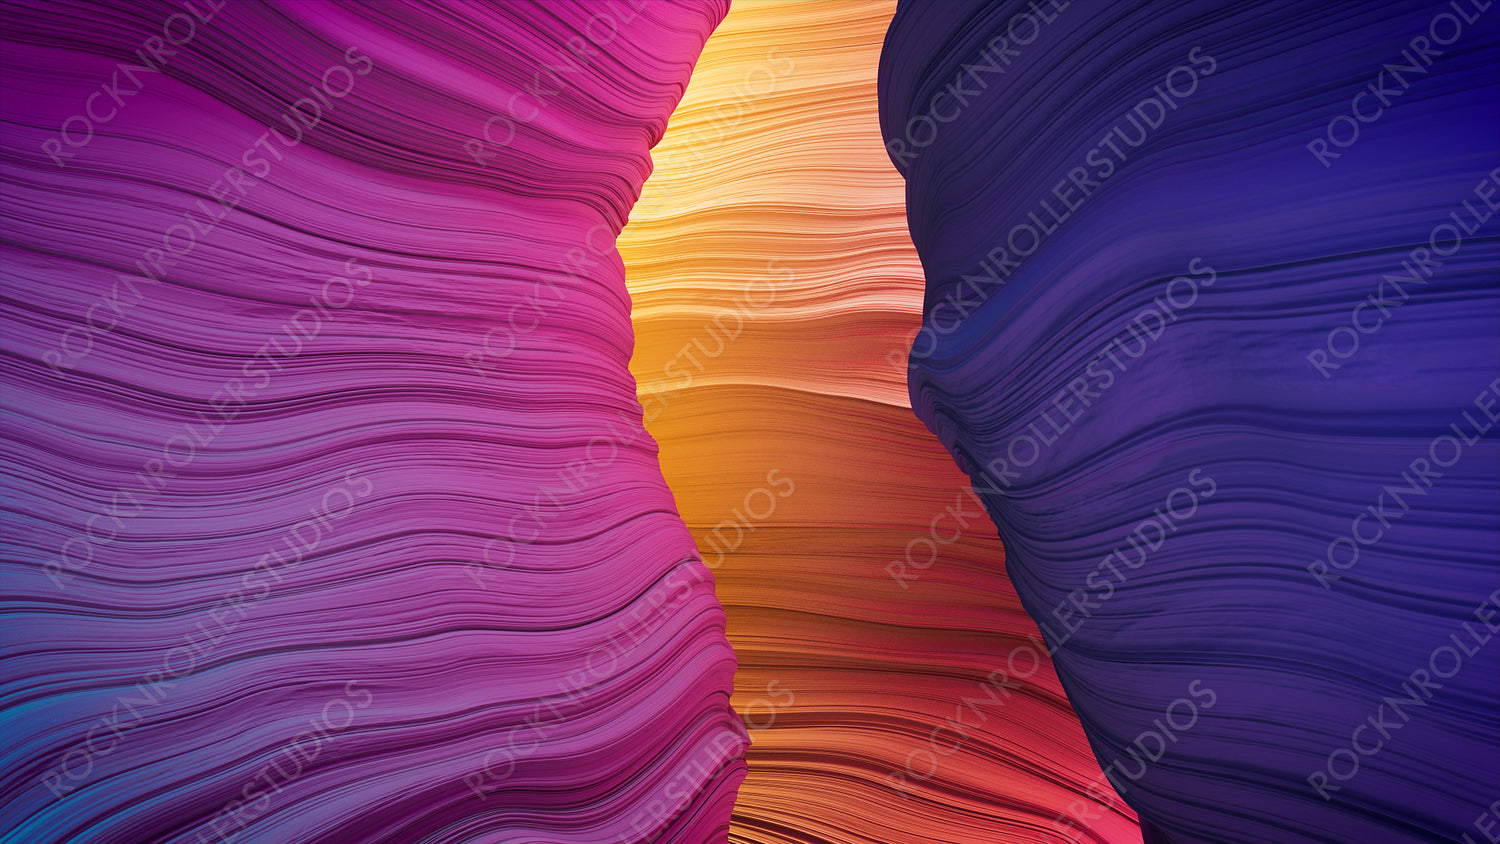 Abstract 3D Render with Organic, Undulating Surfaces. Trendy Purple and Yellow Background.